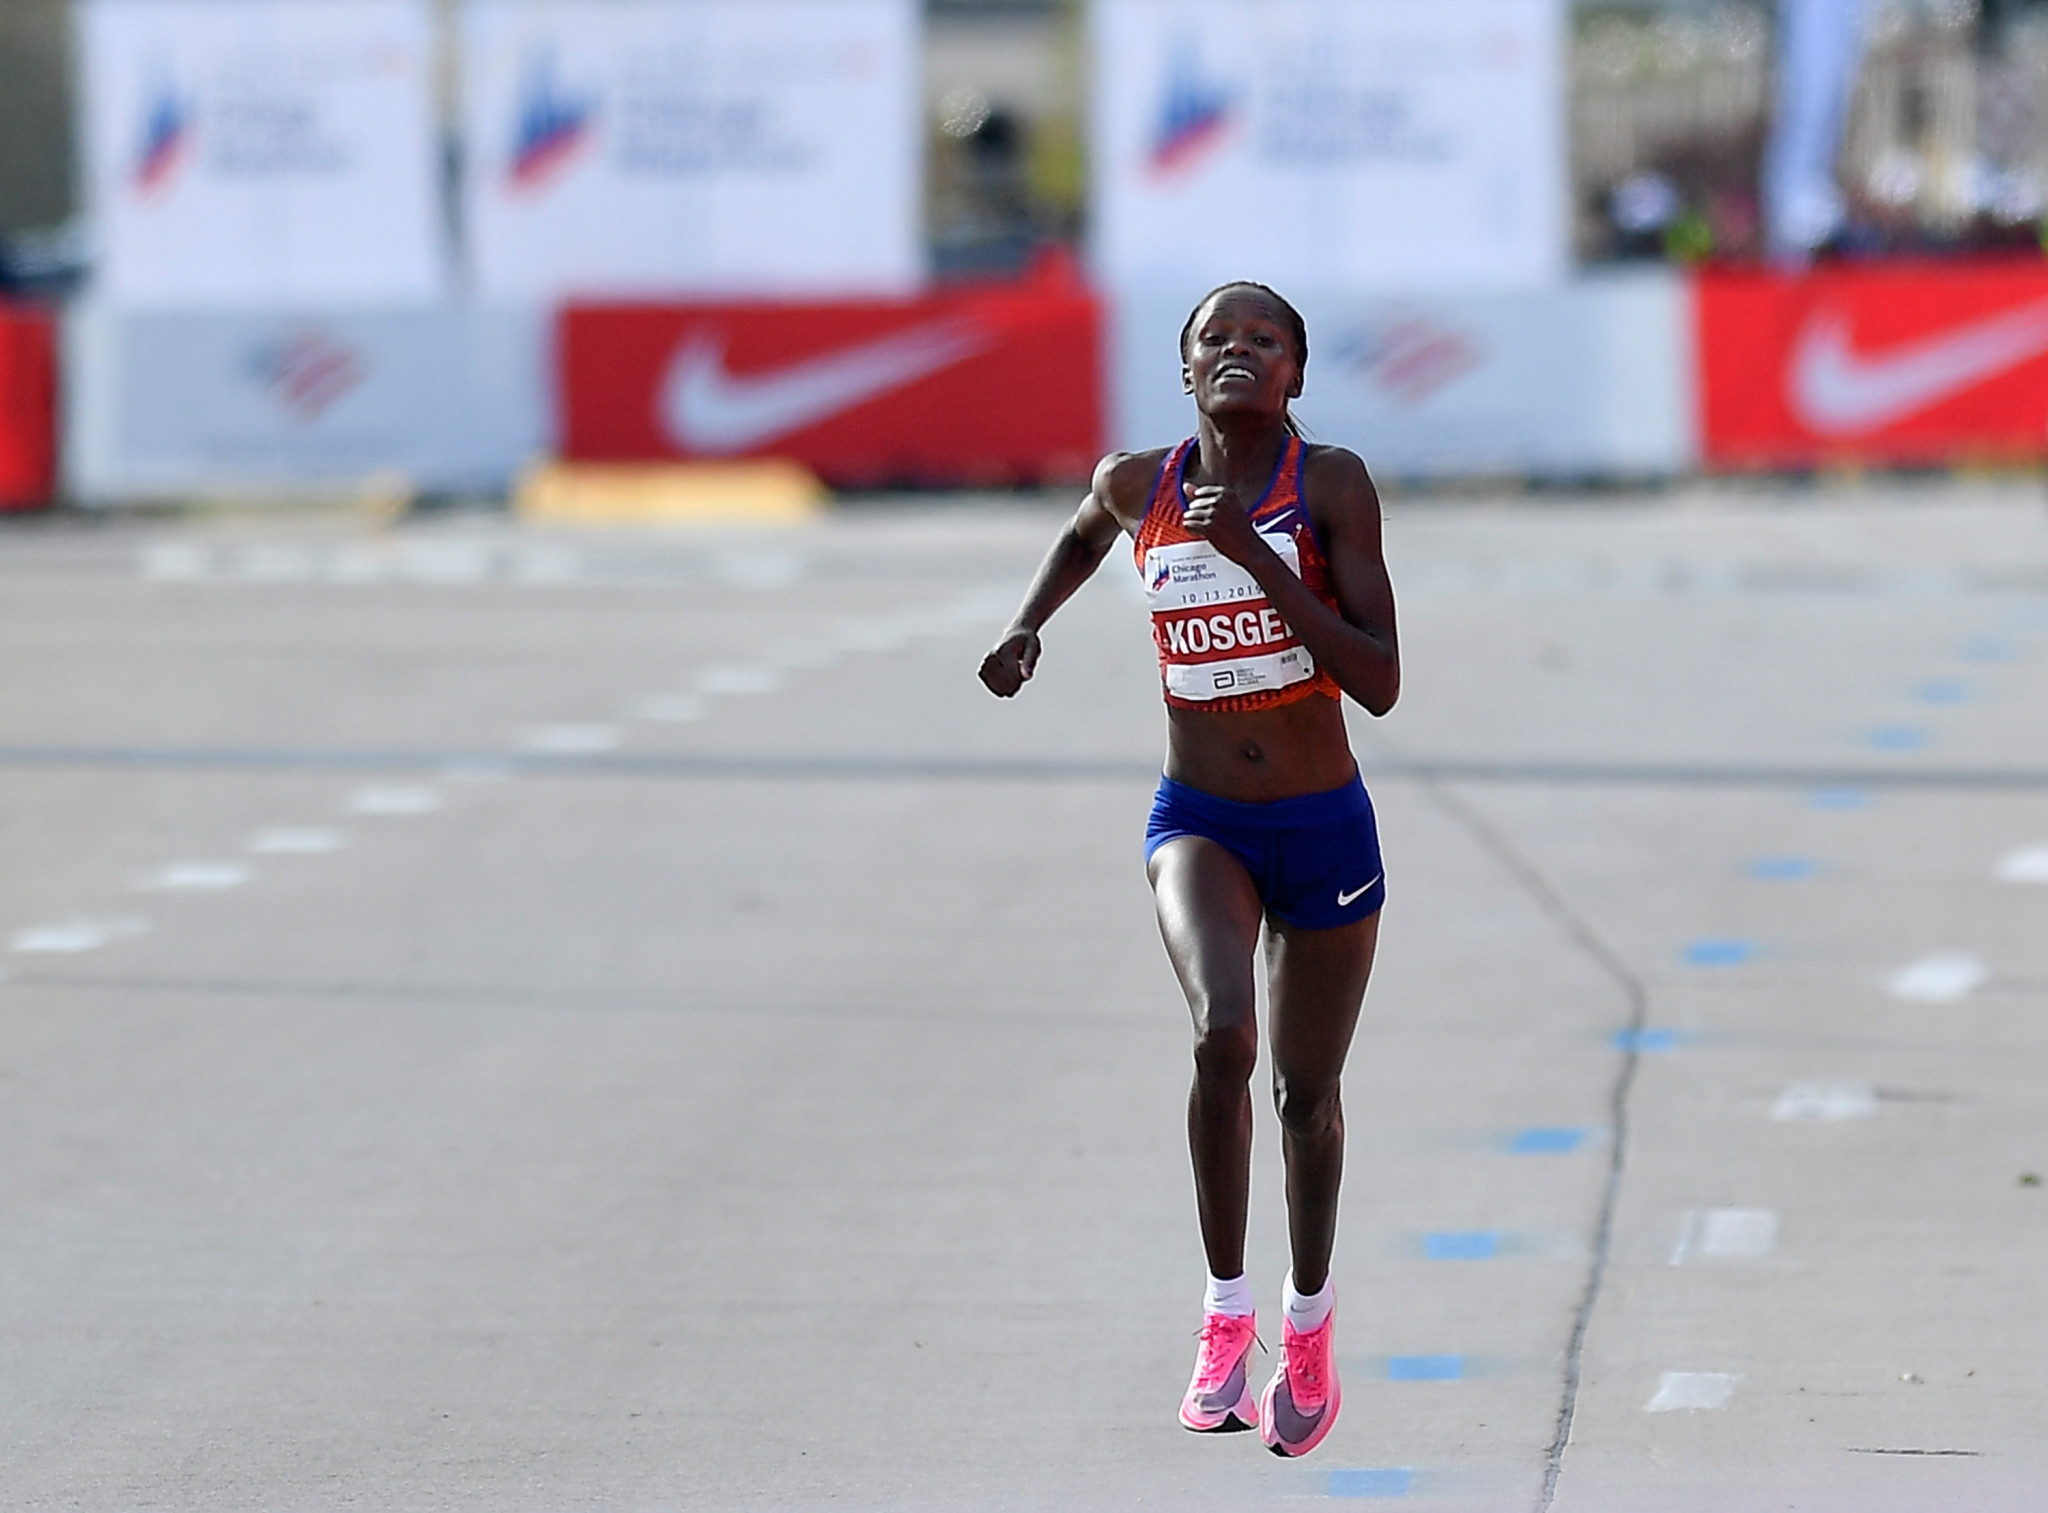 Eliud Kipchoge's countrywoman Brigid Kosgei wore the same Nike model of a shoe in Chicago the day after he ran a sub-two hour marathon to break Paula Radcliffe's 16-year-old world record ©Getty Images